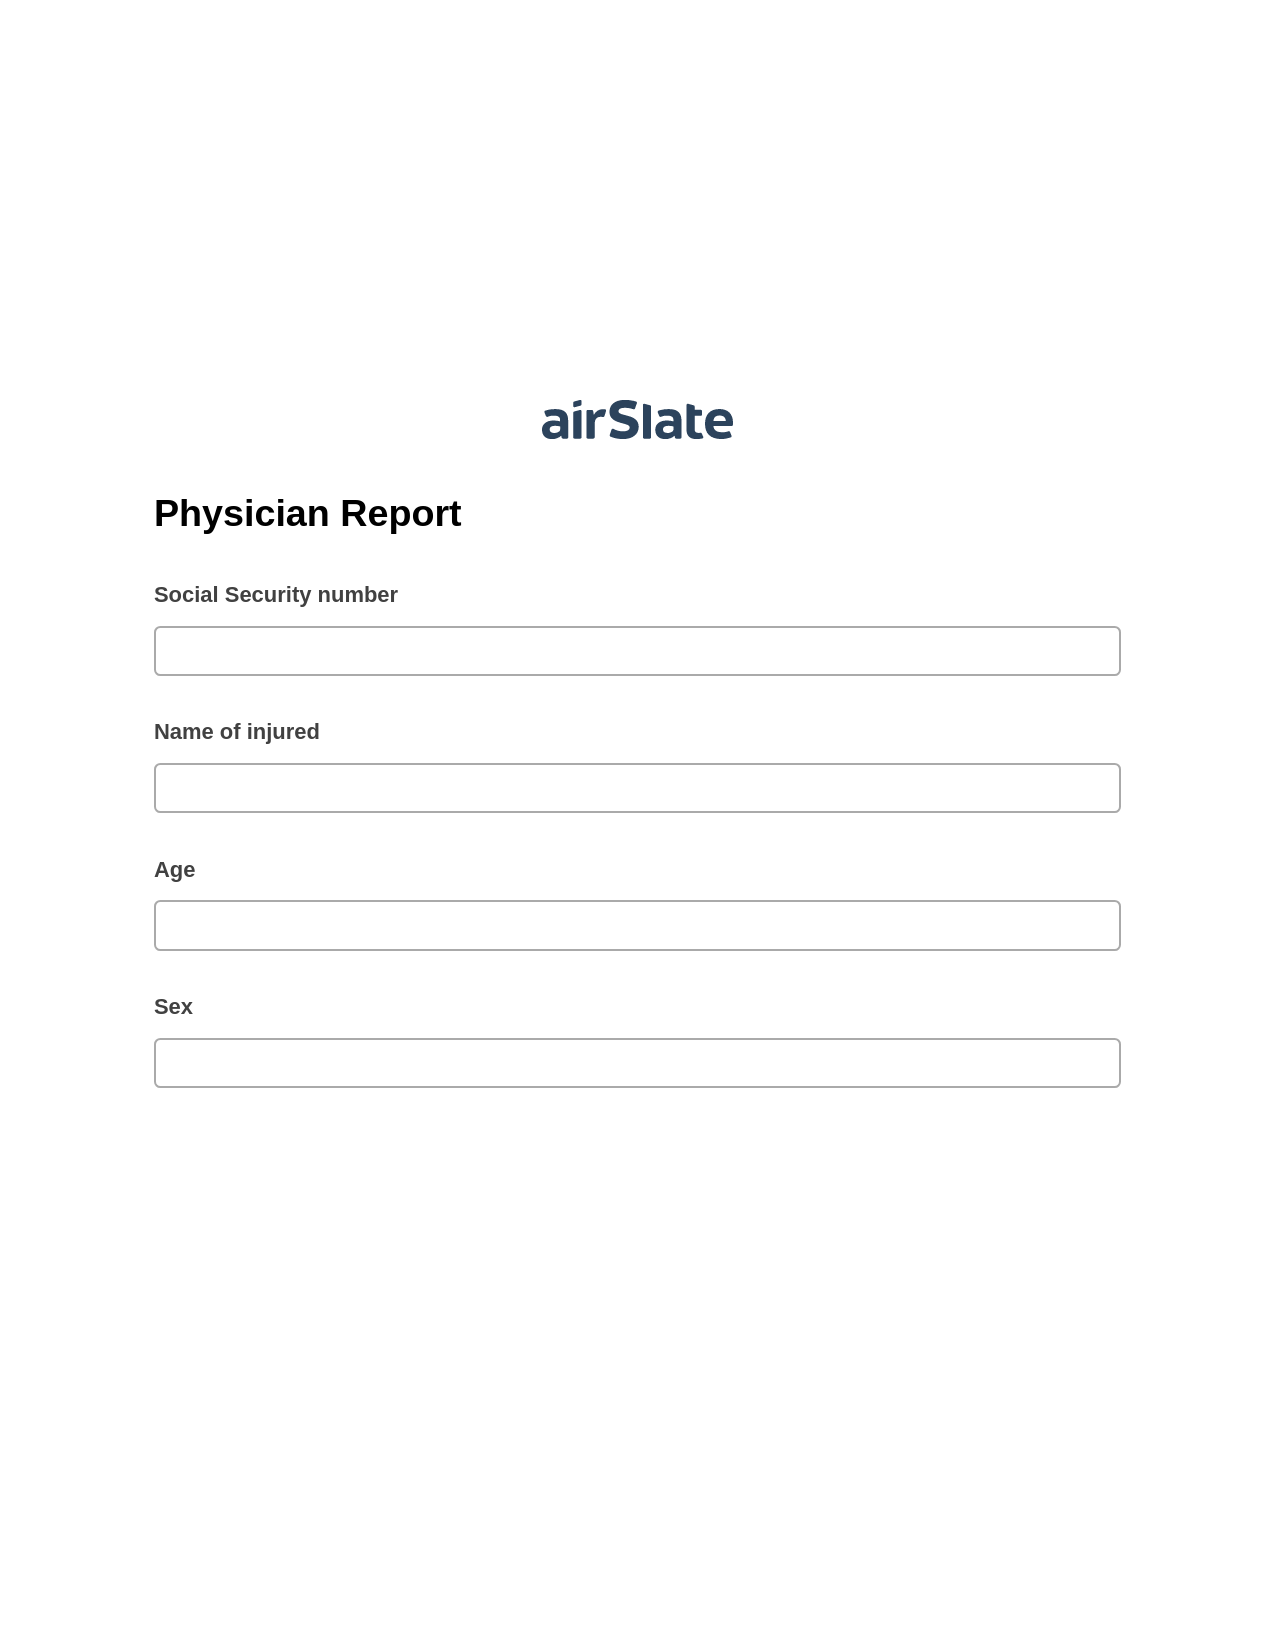 Physician Report Pre-fill Document Bot, Update NetSuite Record Bot, Export to Google Sheet Bot